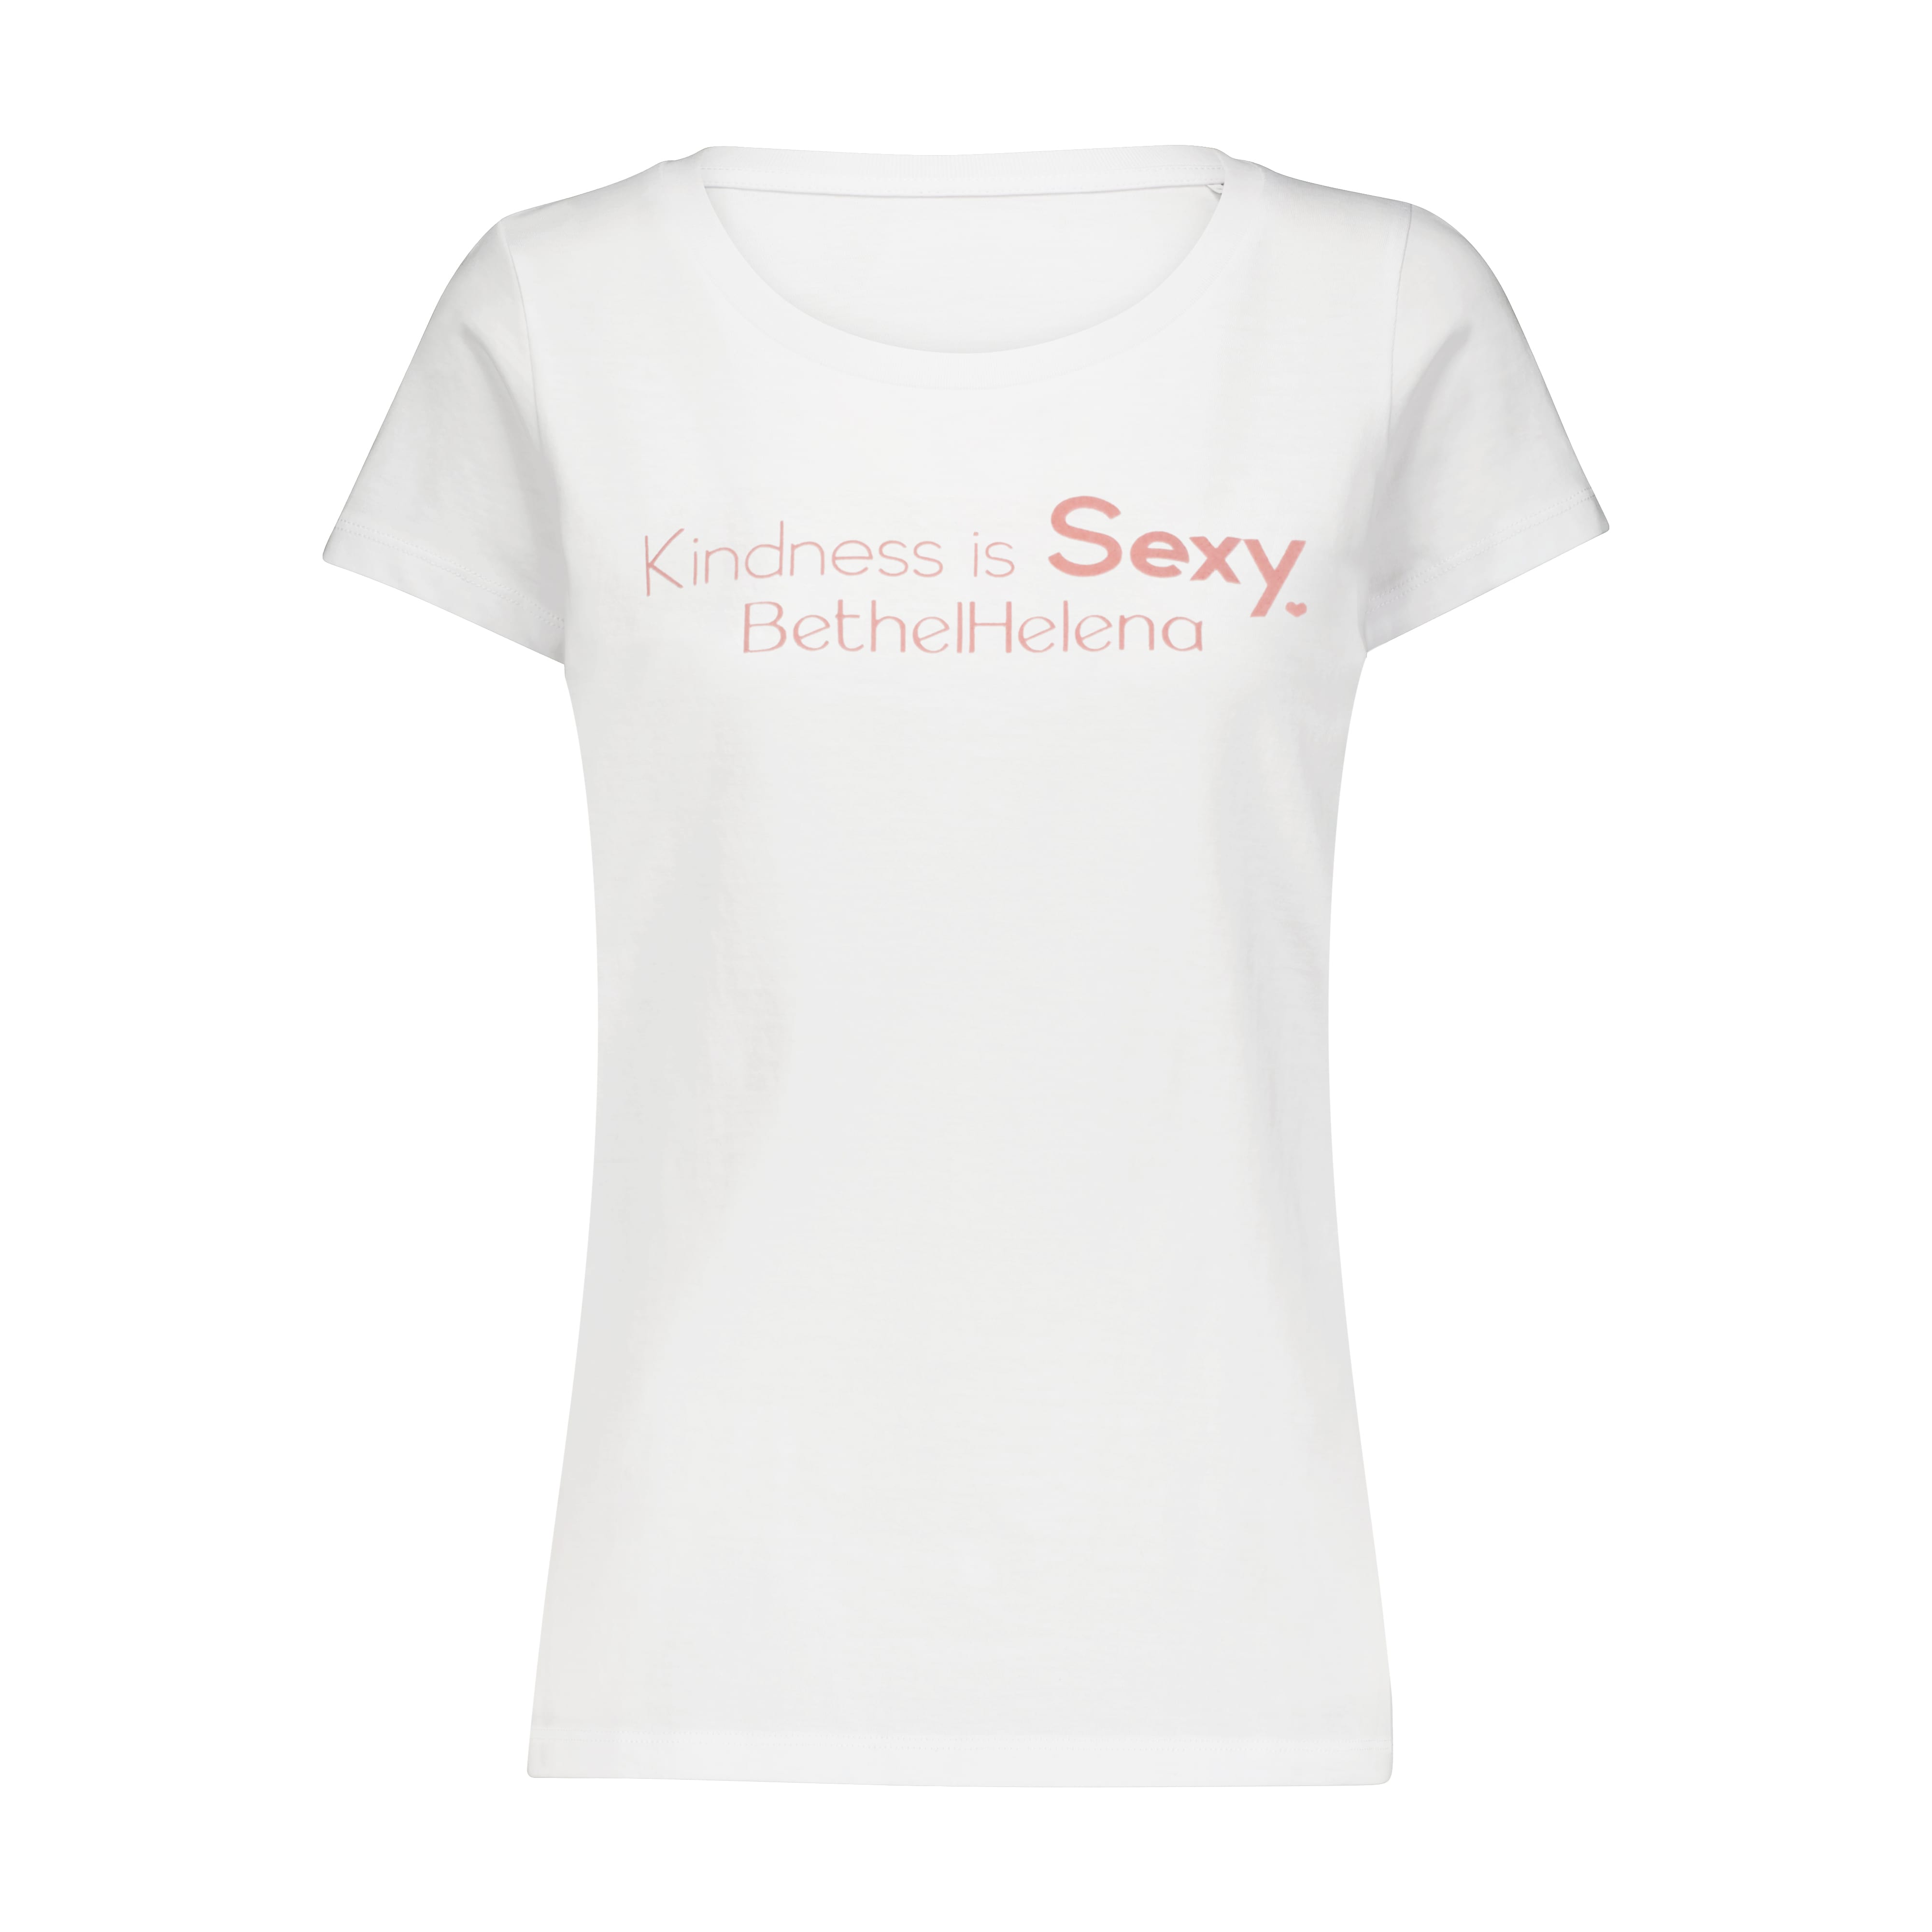 Kindness is Sexy Tee